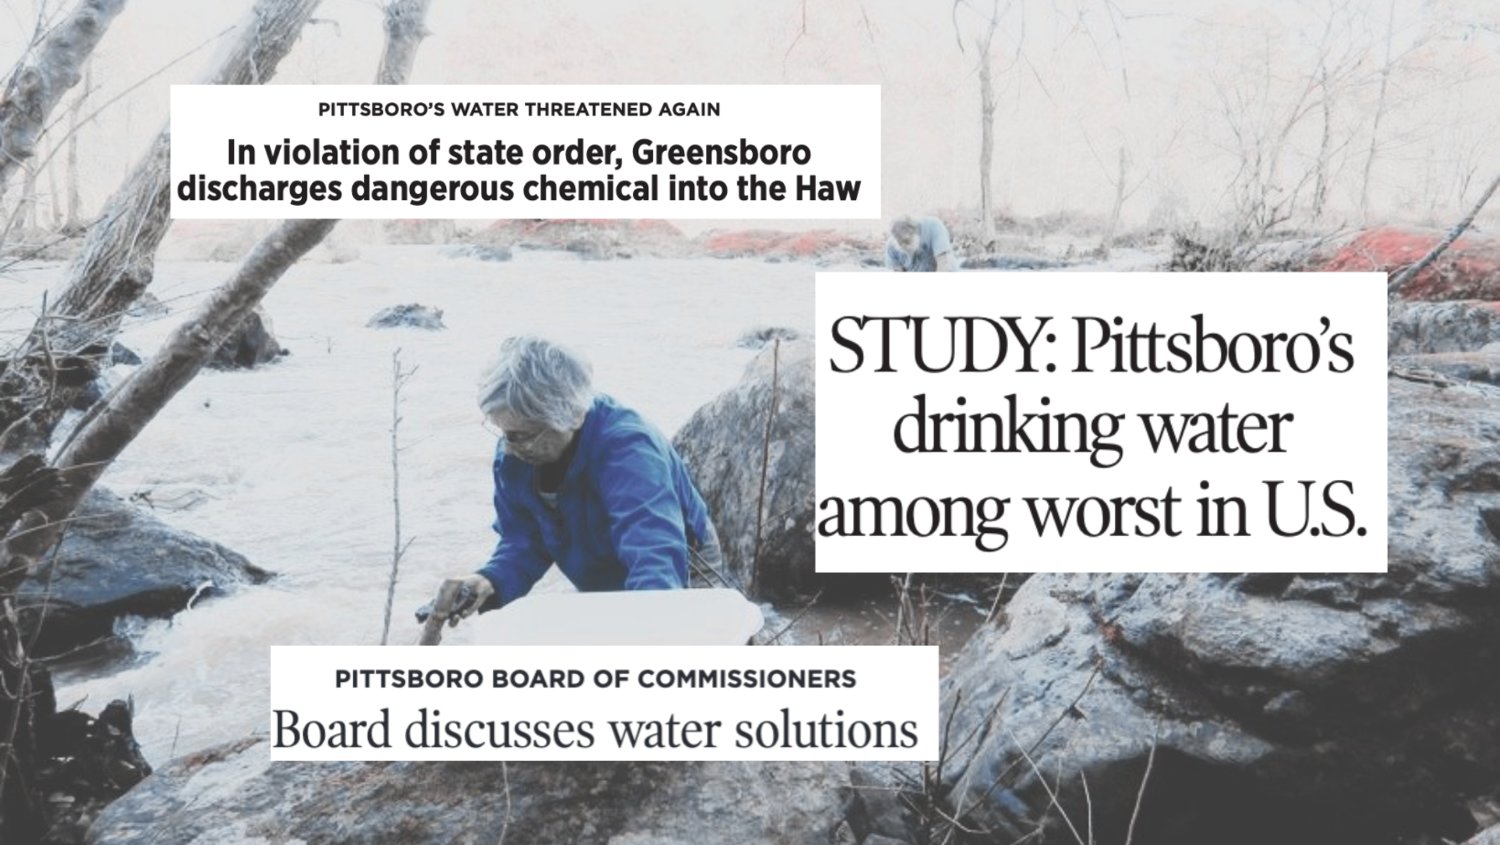 The illegal discharge of 1,4-Dioxane in Greensboro plant that supplies water to Pittsboro three weeks ago follows years of water woes for the town.